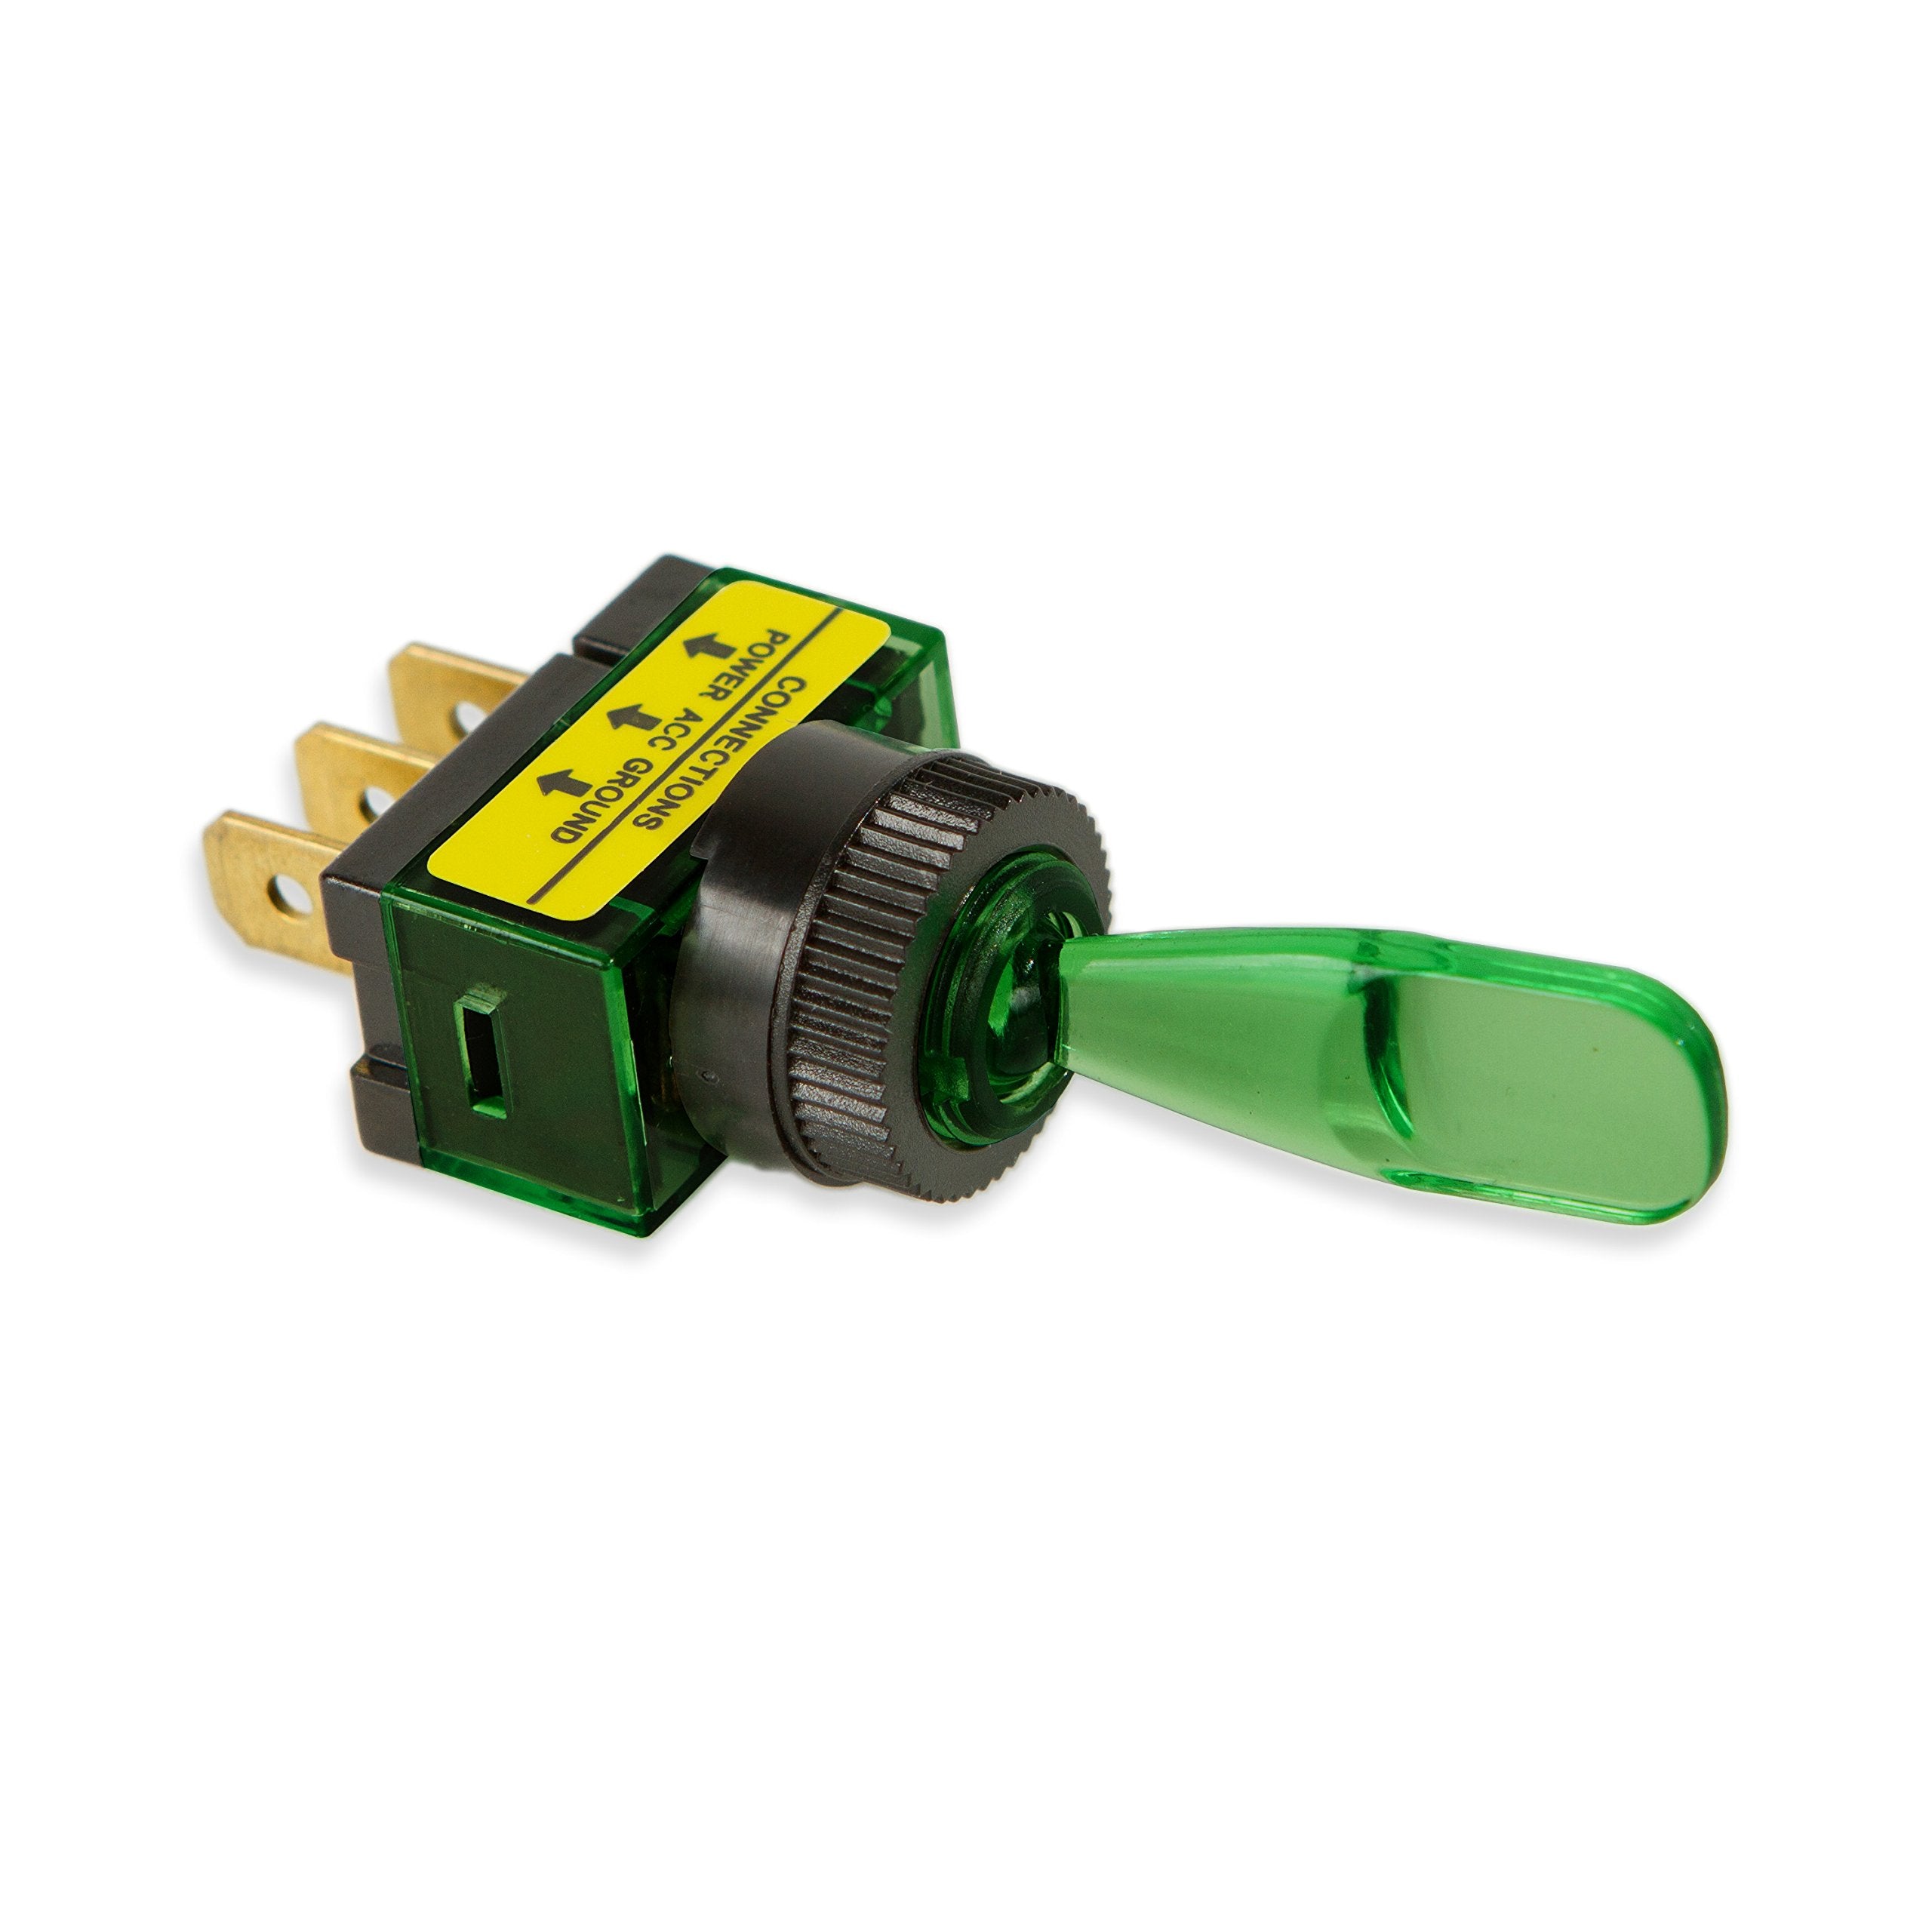 WirthCo 20501 Battery Doctor Green Illuminated Toggle Switch (ON/OFF 20 AMP)